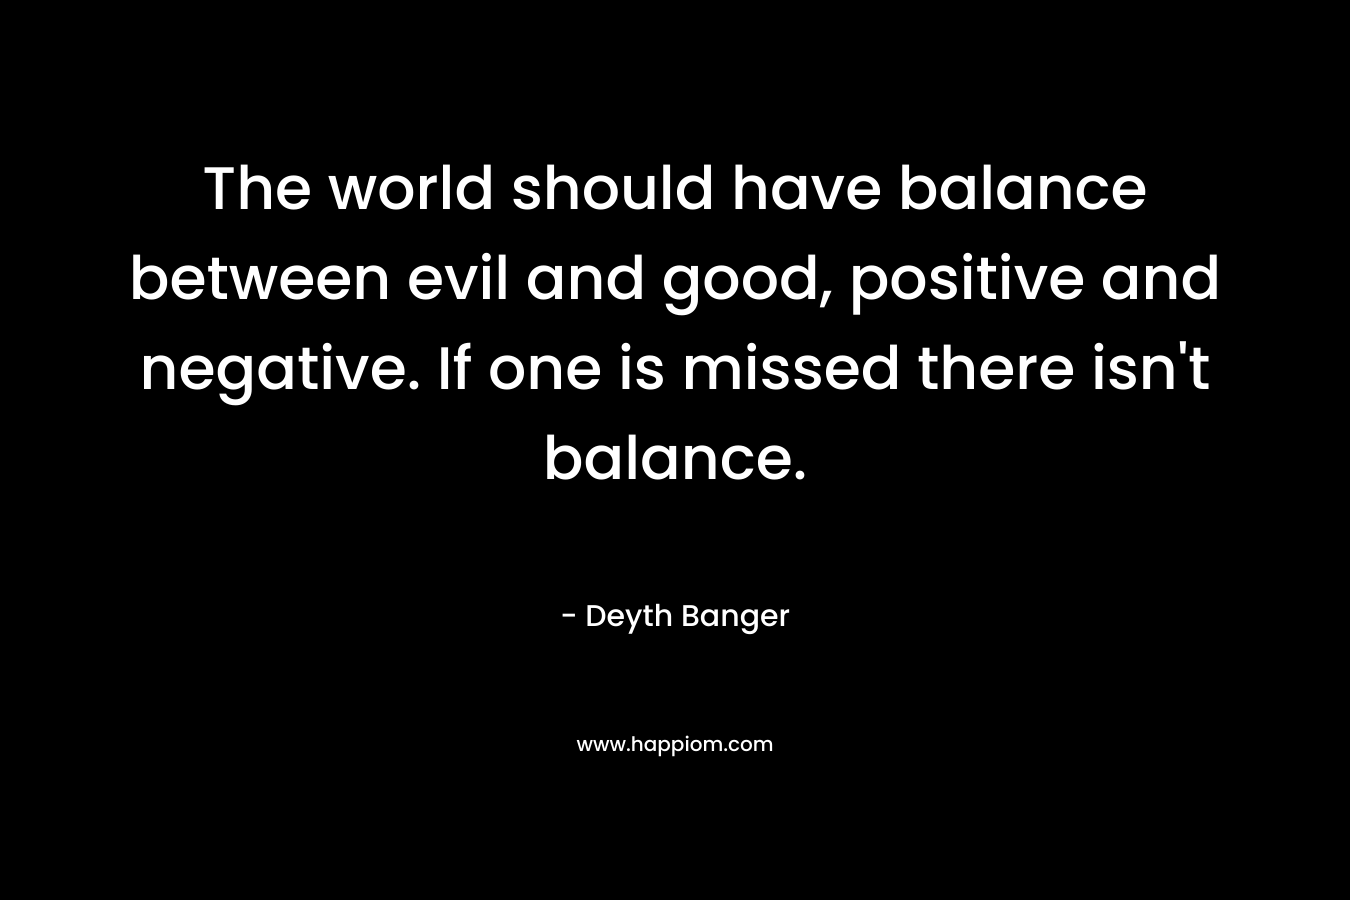 The world should have balance between evil and good, positive and negative. If one is missed there isn't balance.